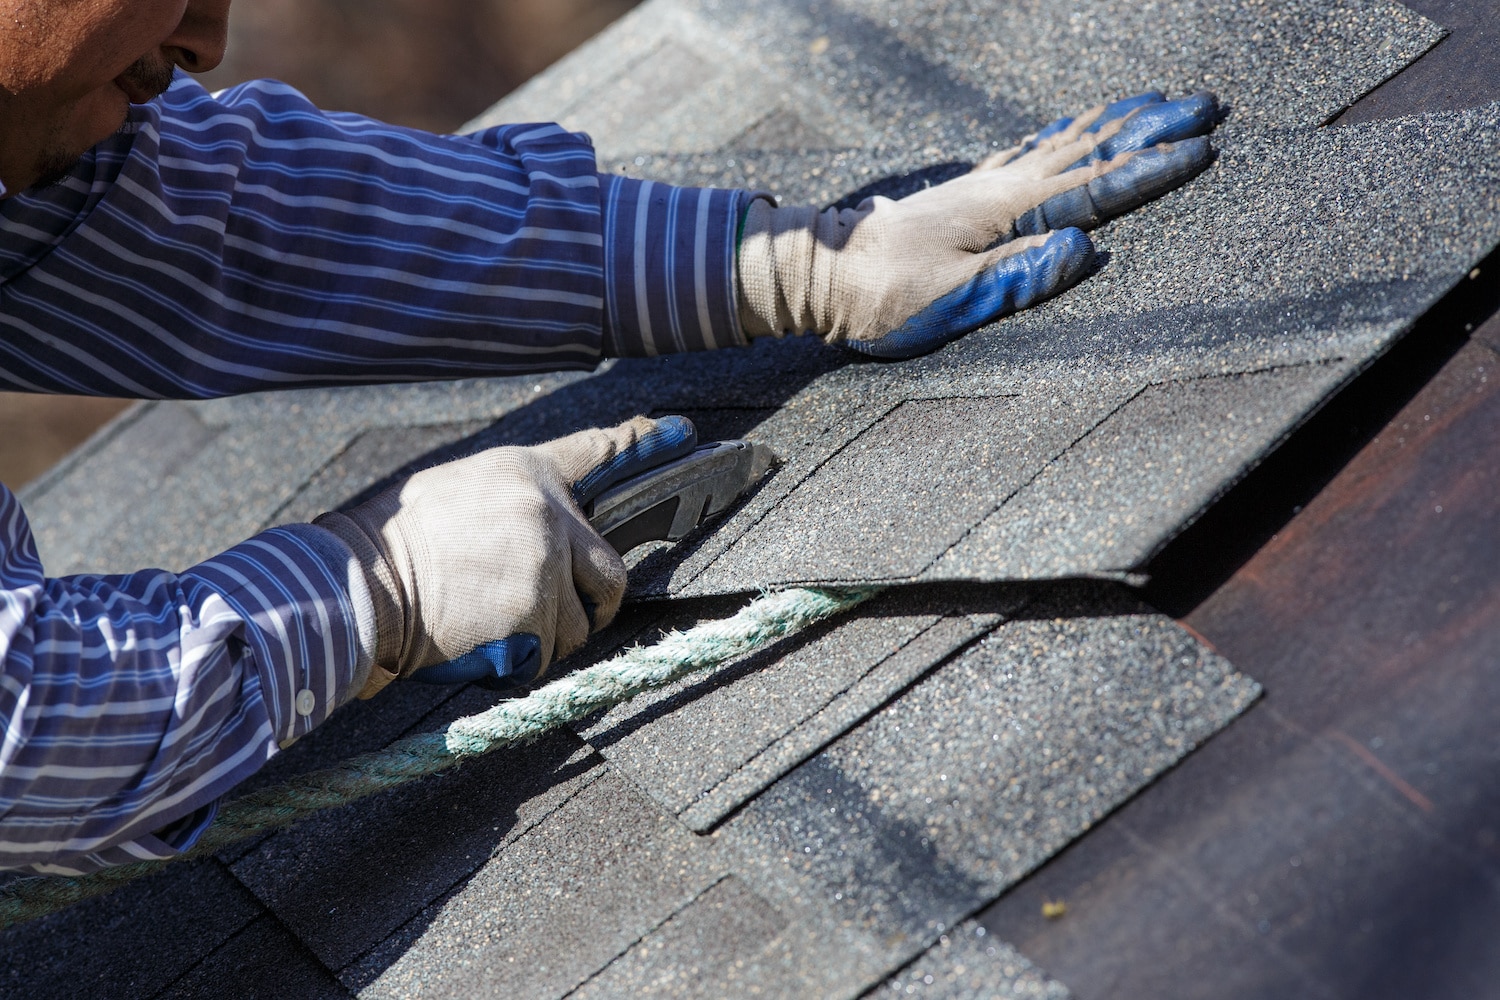 how to get shingles on roof hands